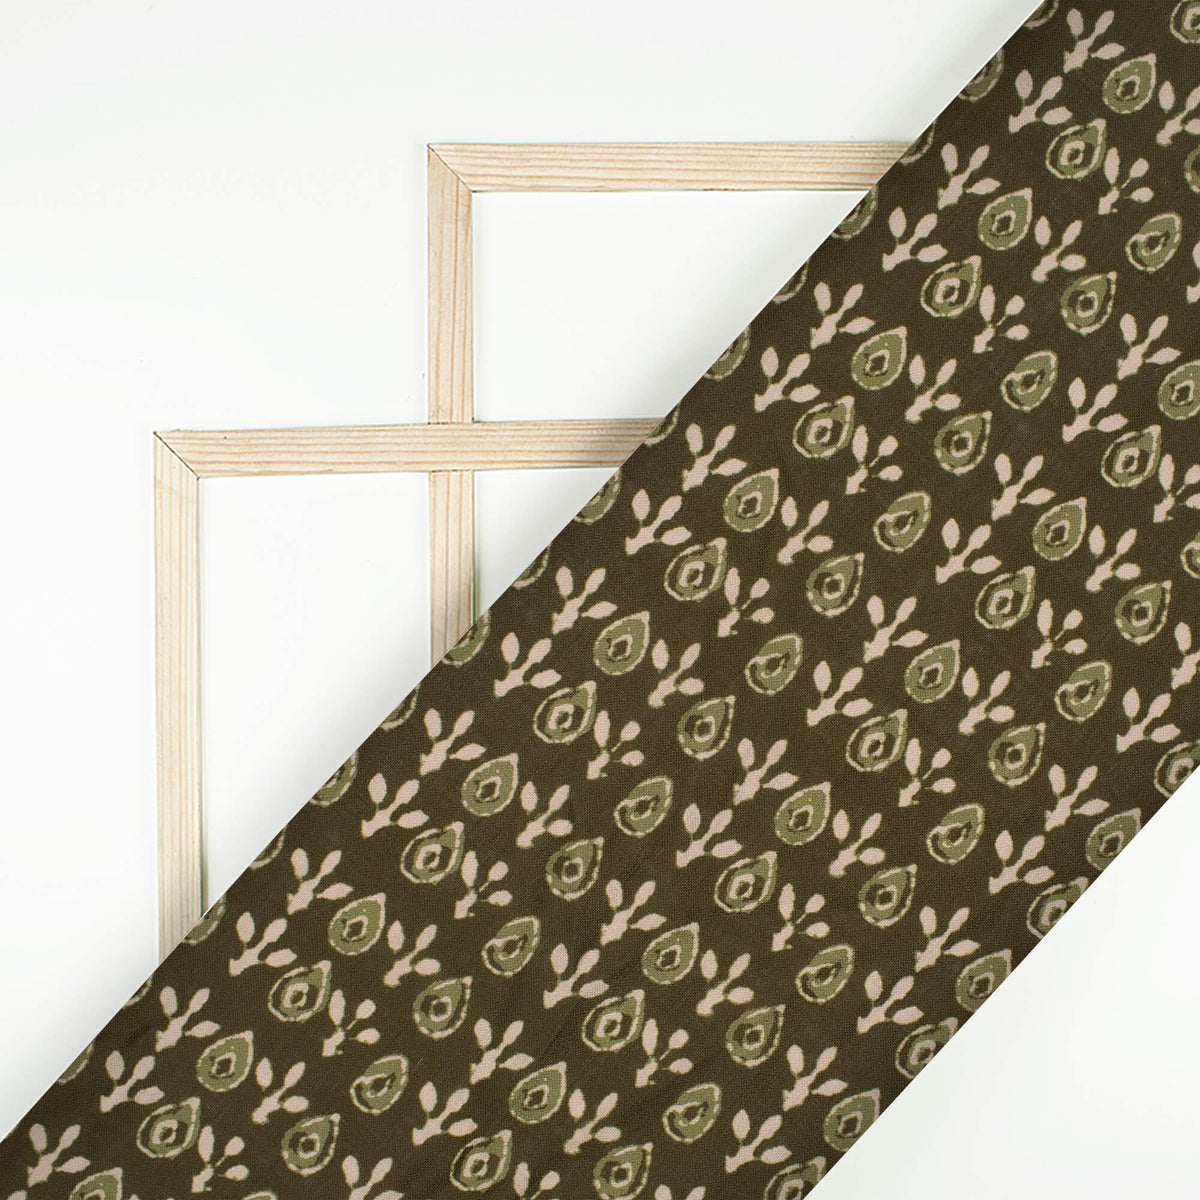 Dark Olive Green And Oat Beige Booti Pattern Digital Print Linen Textured Fabric (Width 56 Inches)